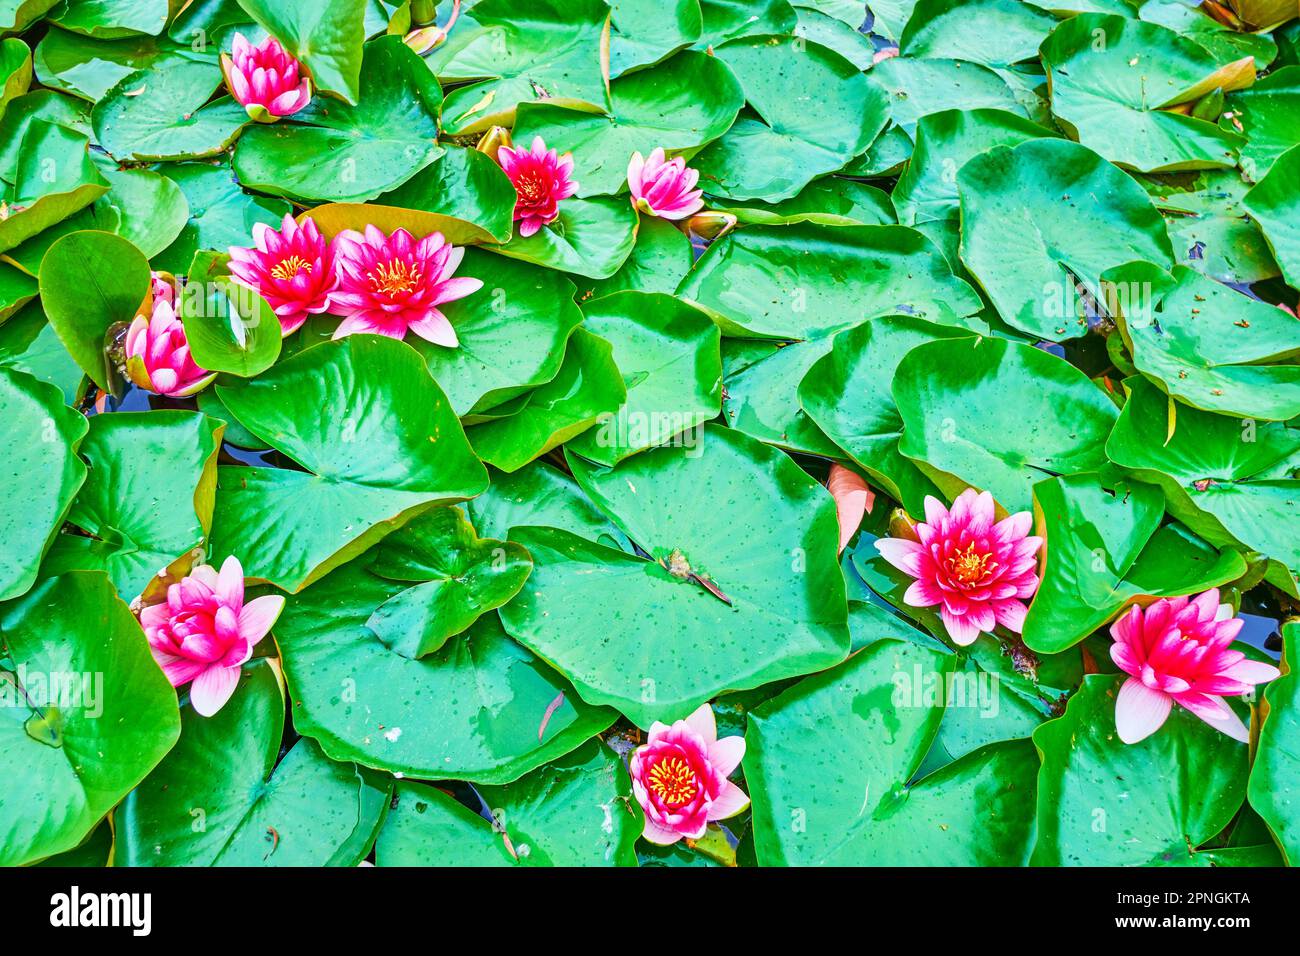 The bright flowers of Nymphaea Escarboucle aquatic plants with lush green leaves, coveing the surface of the lake Stock Photo